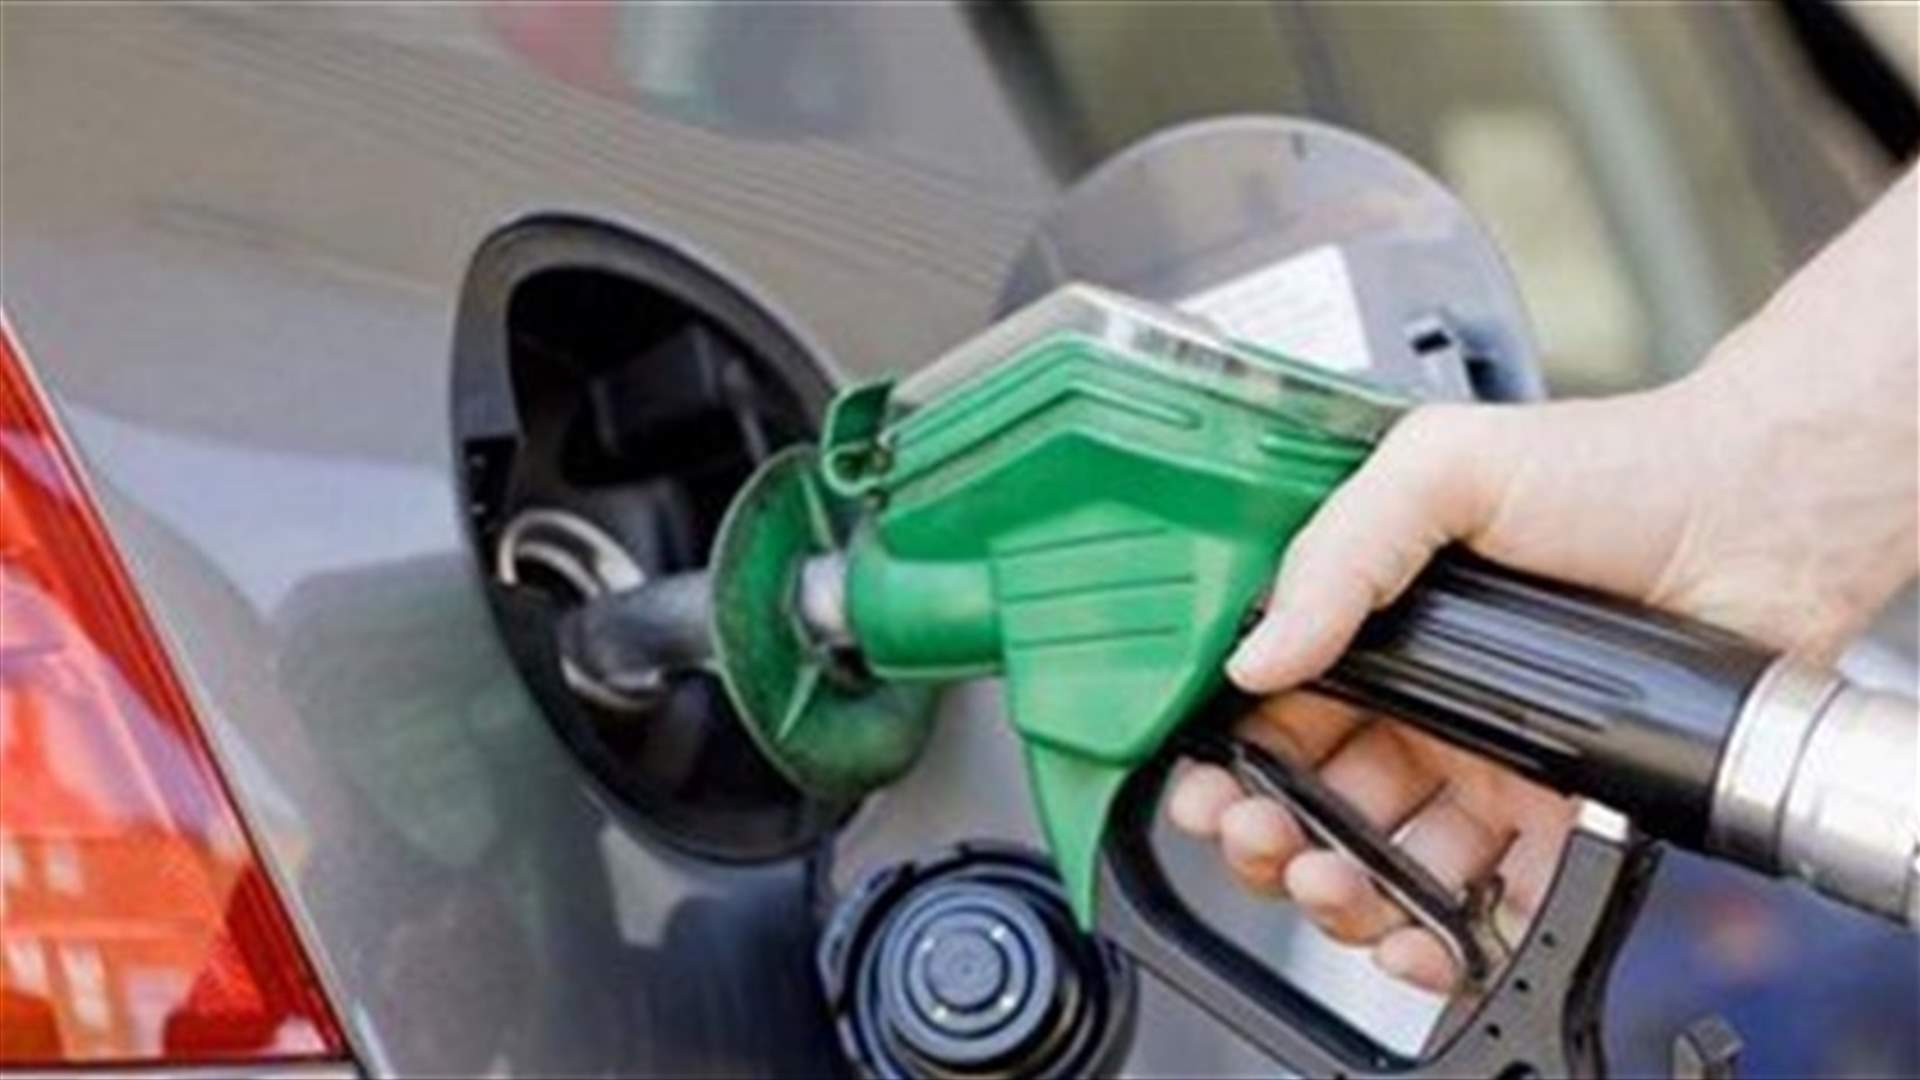 Price of 95 and 98 octane fuel increases 1000 LBP each